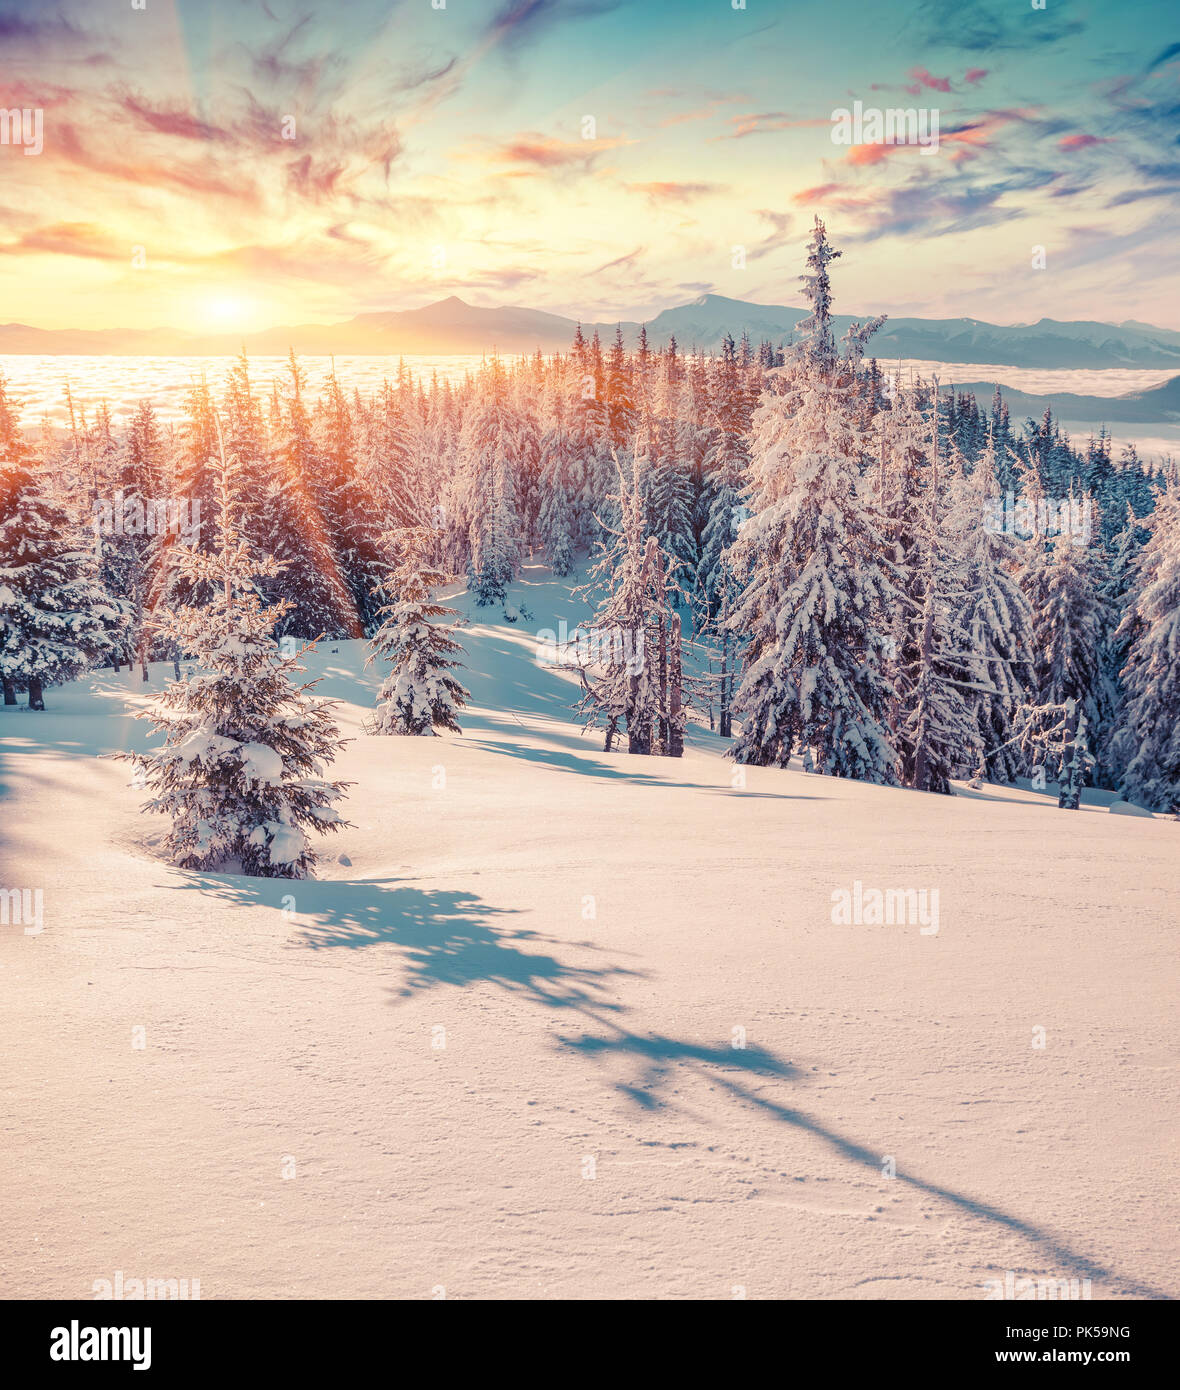 Colorful winter sunrise in the snowy mountains. Fresh snow at frosty morning glowing first sunlight. Instagram toning. Stock Photo